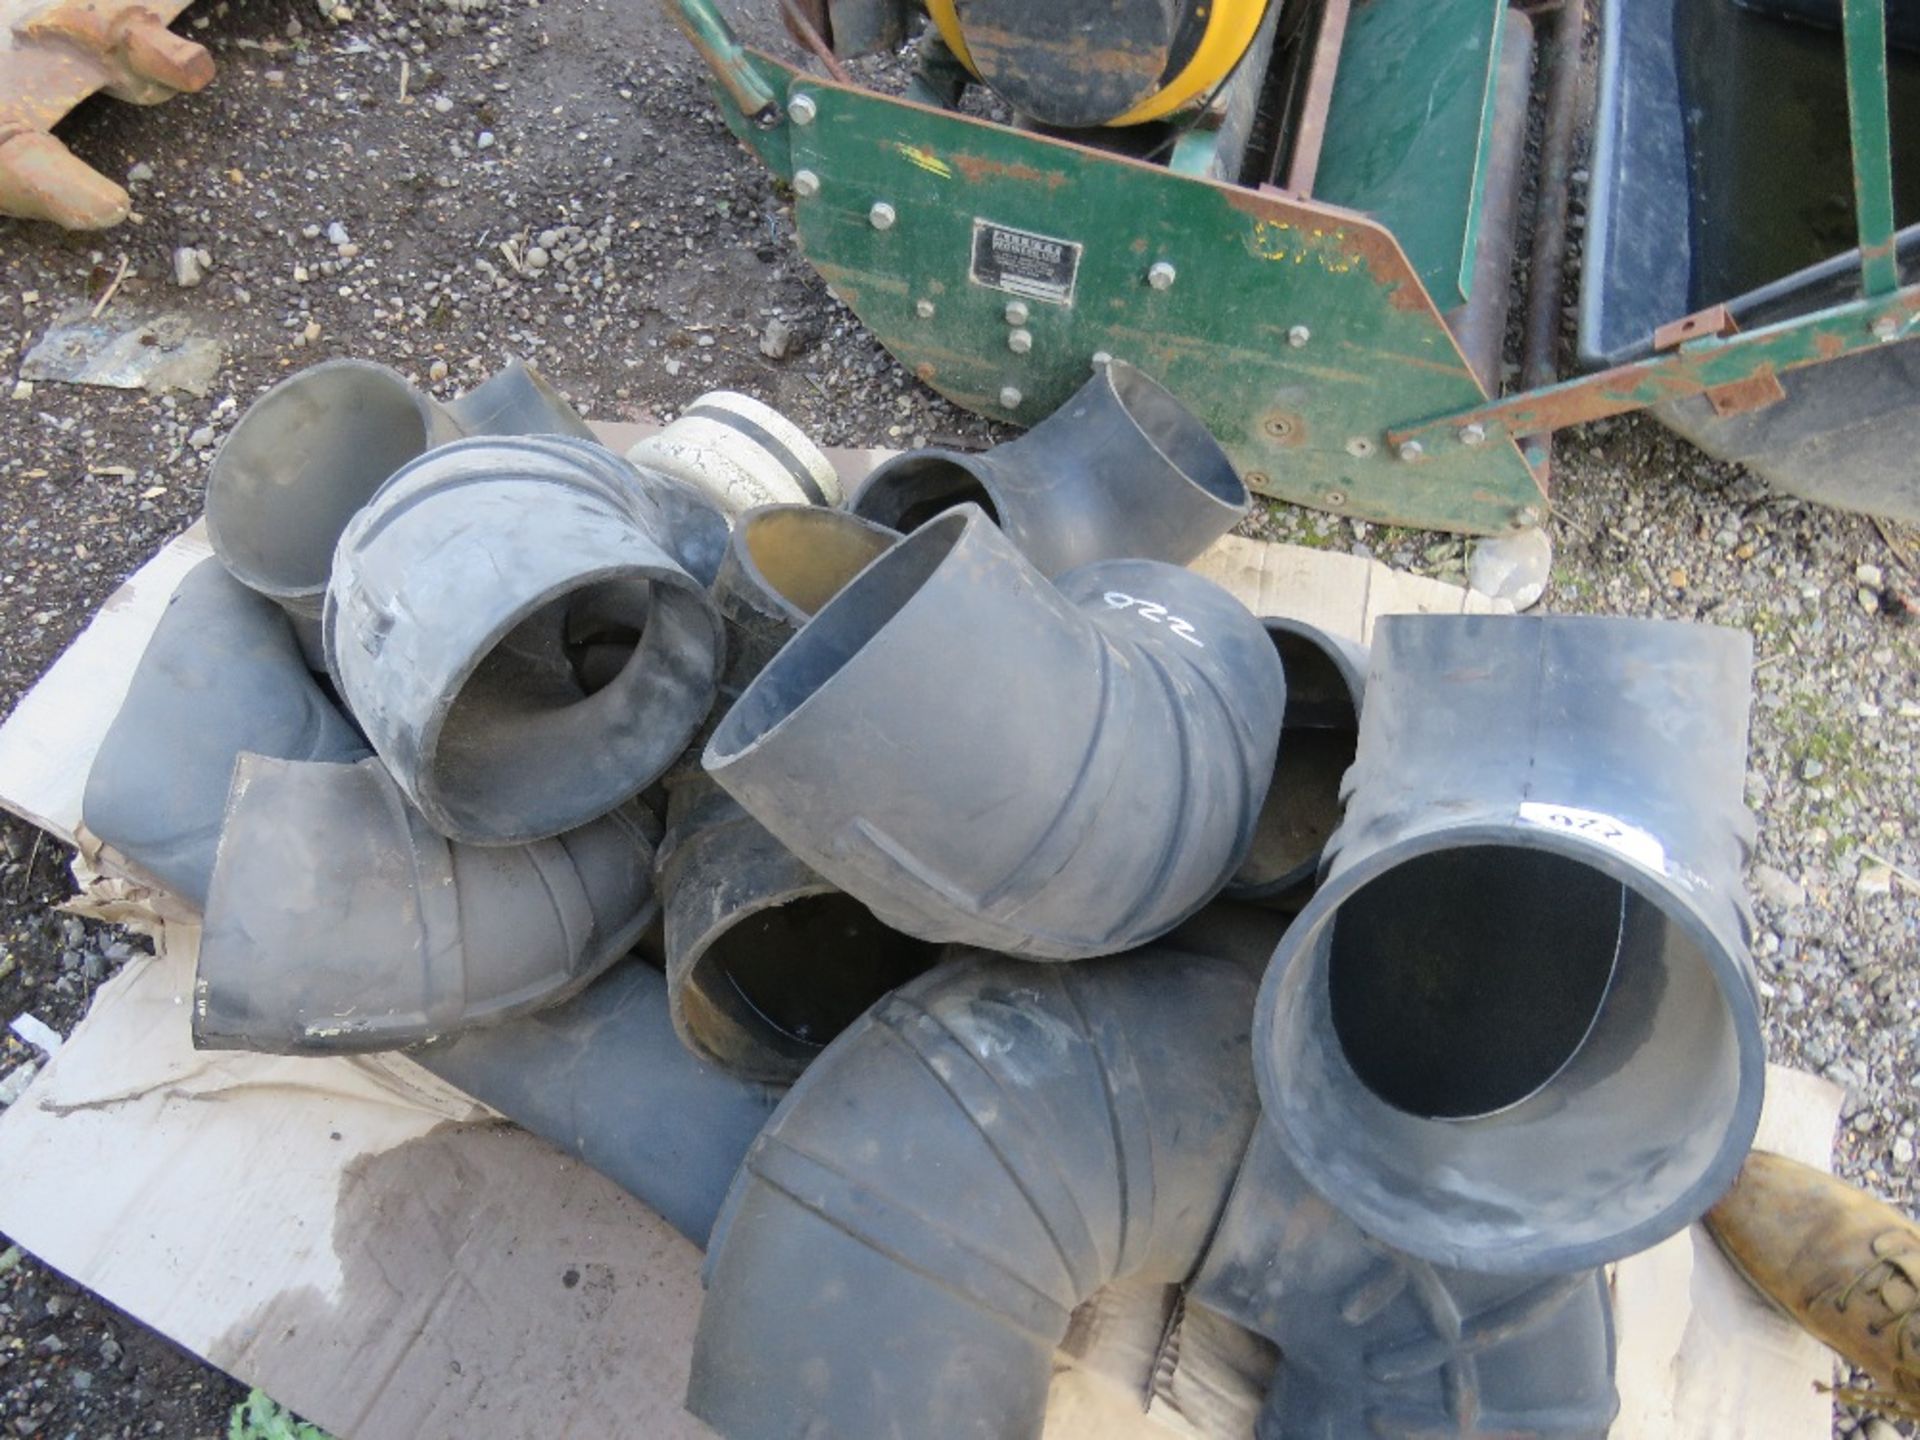 BOX OF LARGE RUBBER ELBOWS. - Image 2 of 2